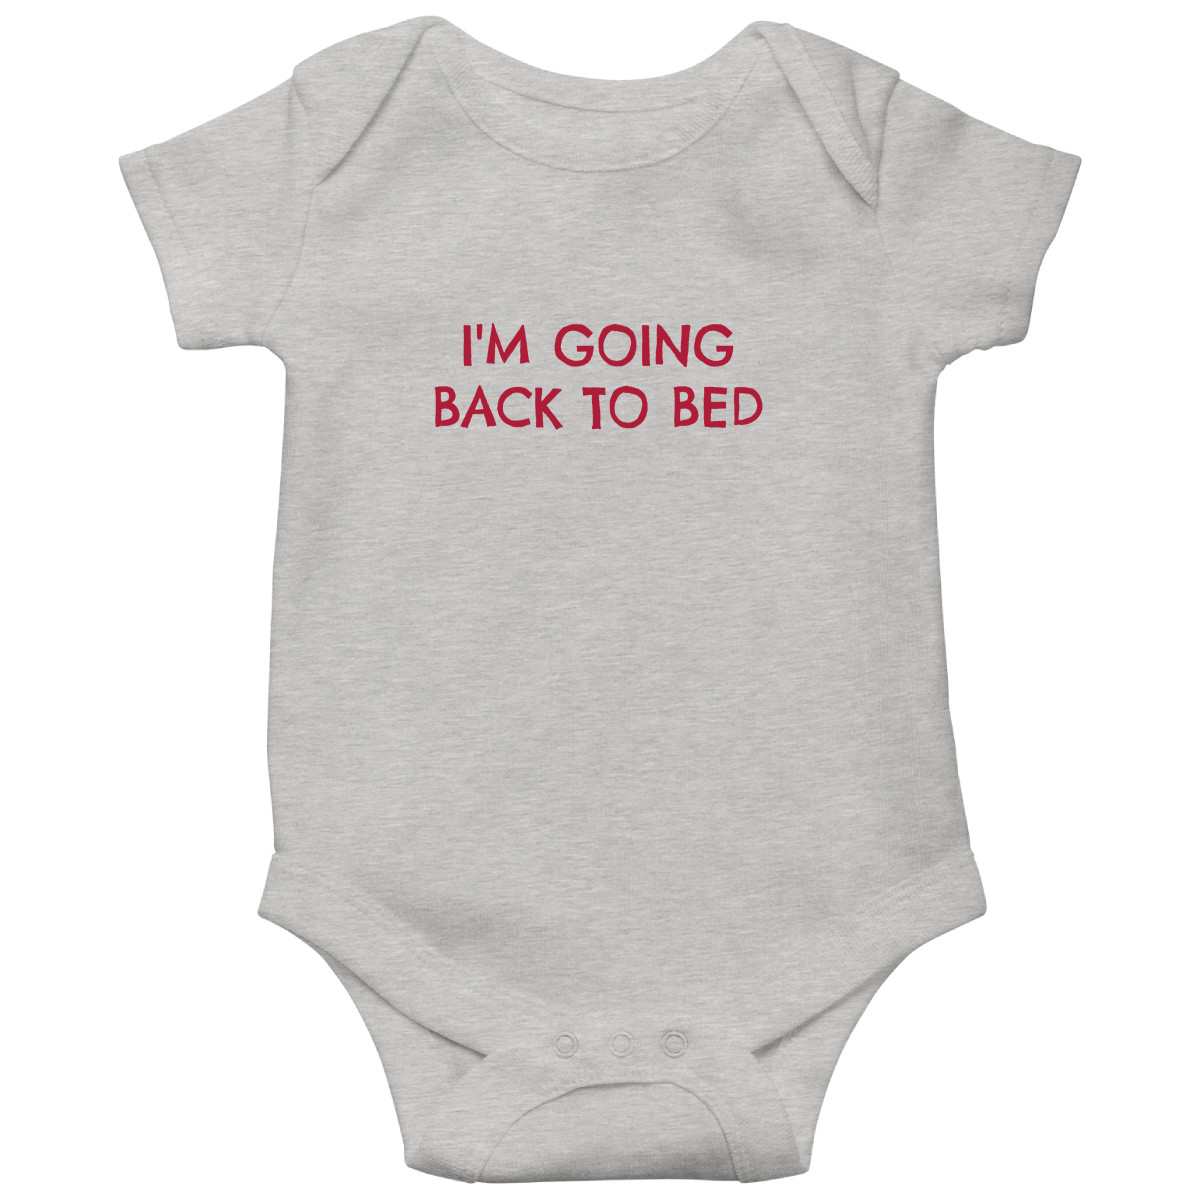 I'm Going Back to Bed Baby Bodysuits | Gray